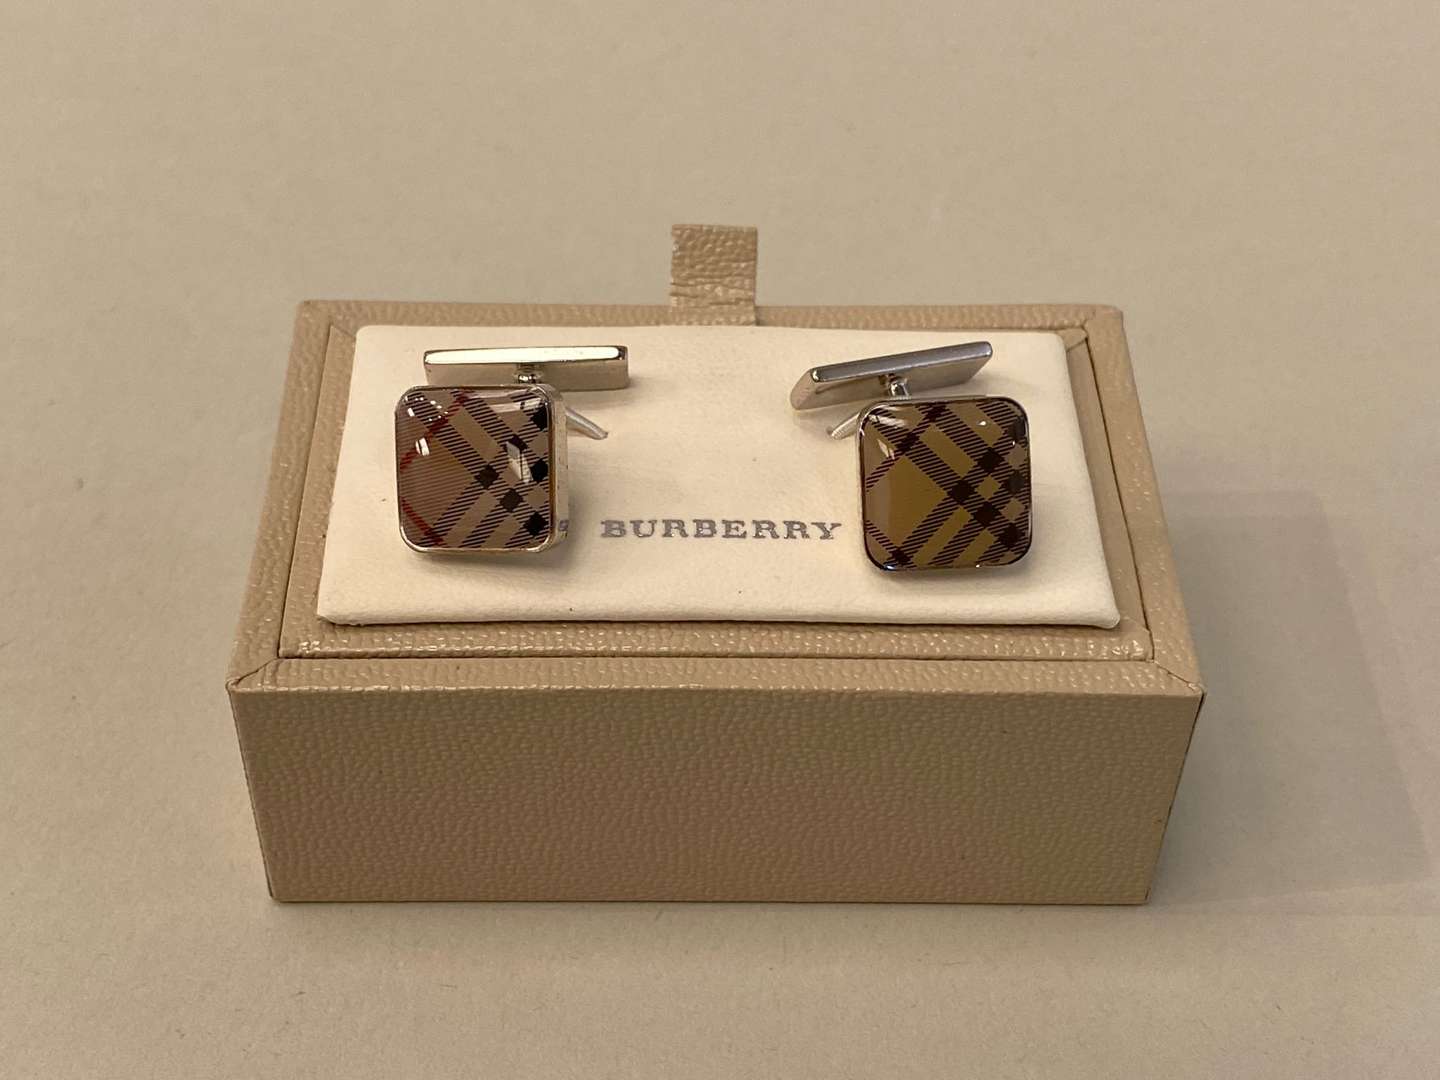 <p>BURBERRY, men's Ostrich, kidskin & cashmere lined gloves, together with a pair of Burberry cufflinks</p>